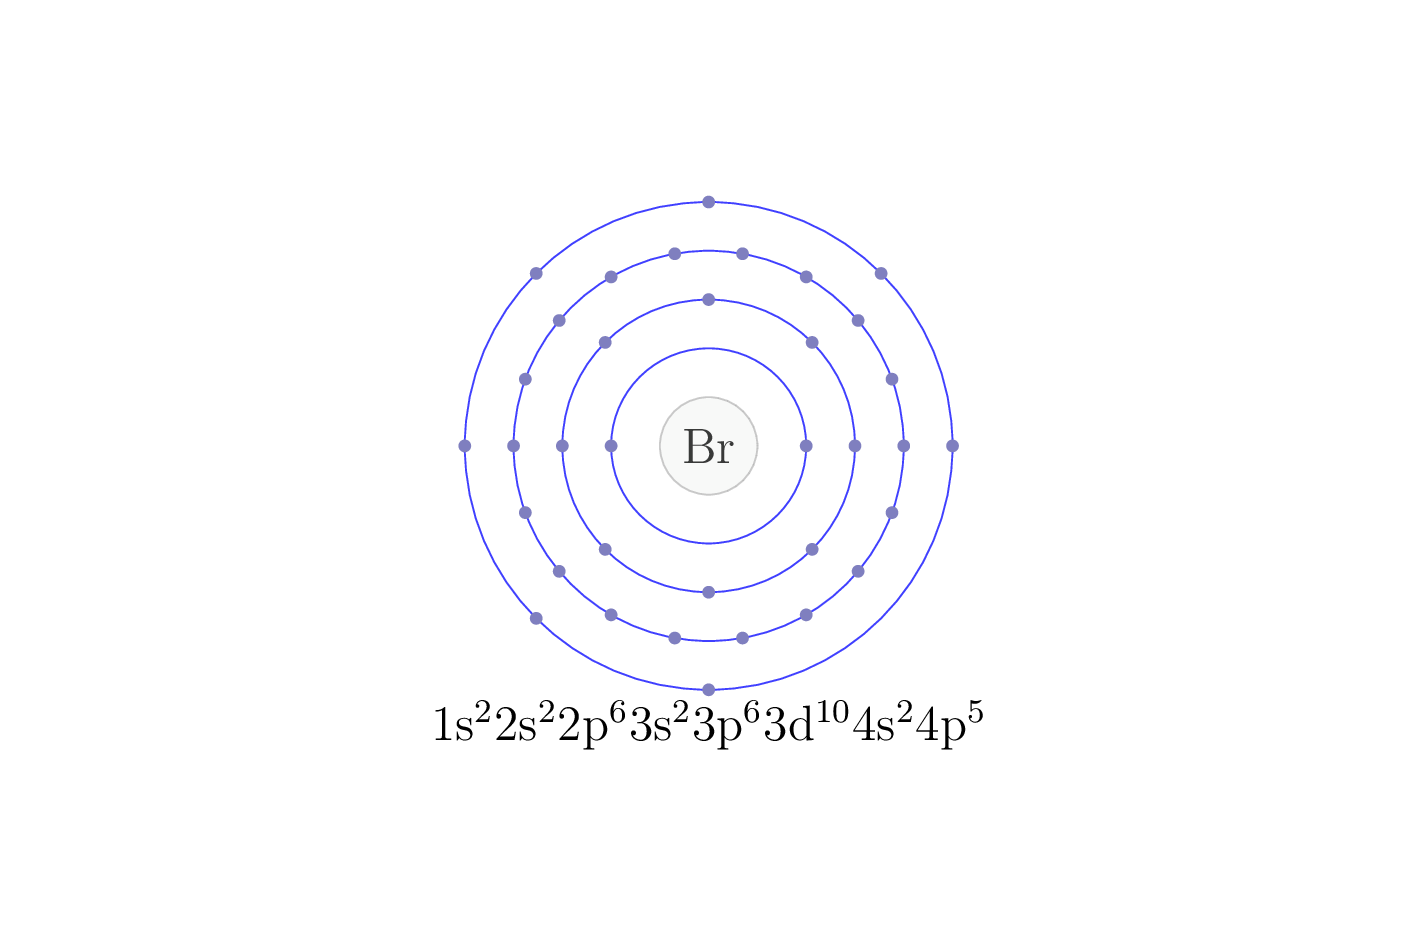 electron configuration of element Br